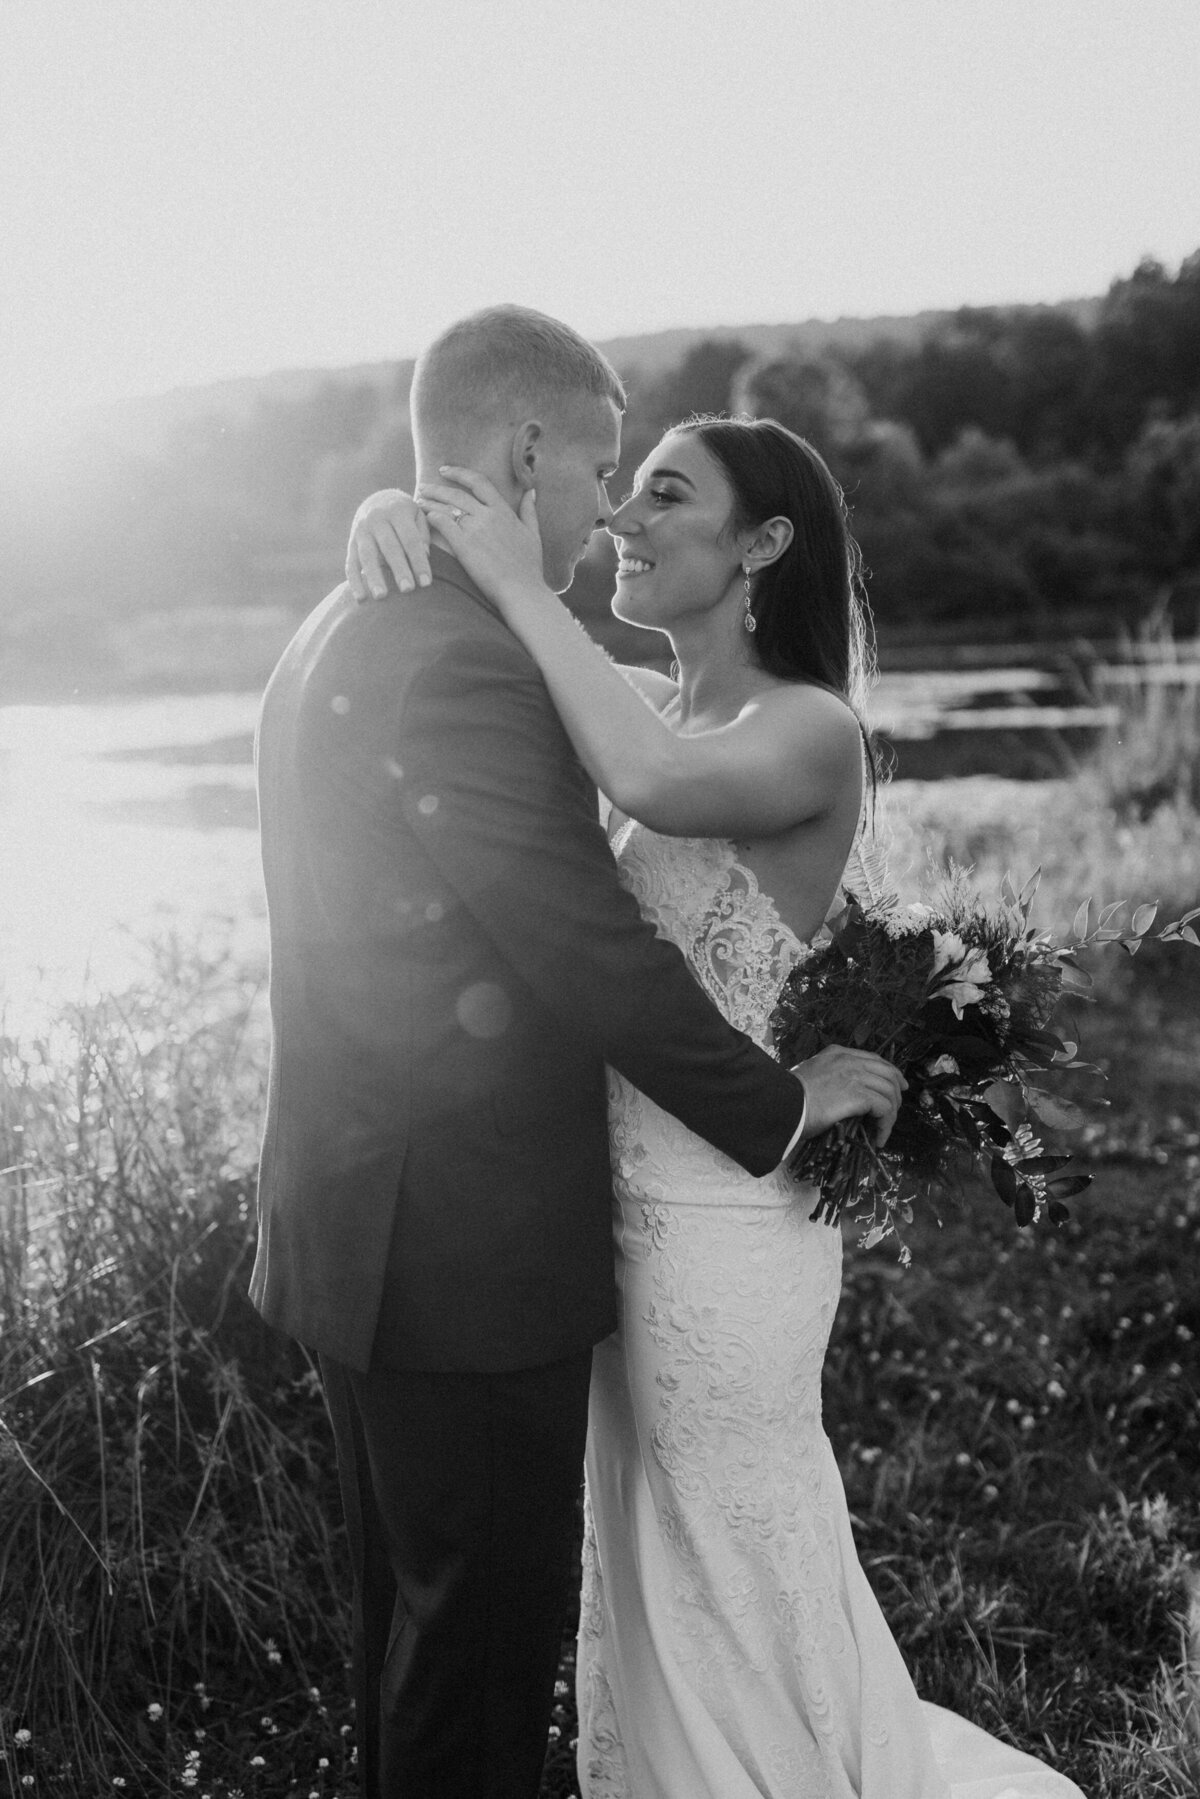 black and white photo of a wedding couple with their arms around each other as they are about to kiss